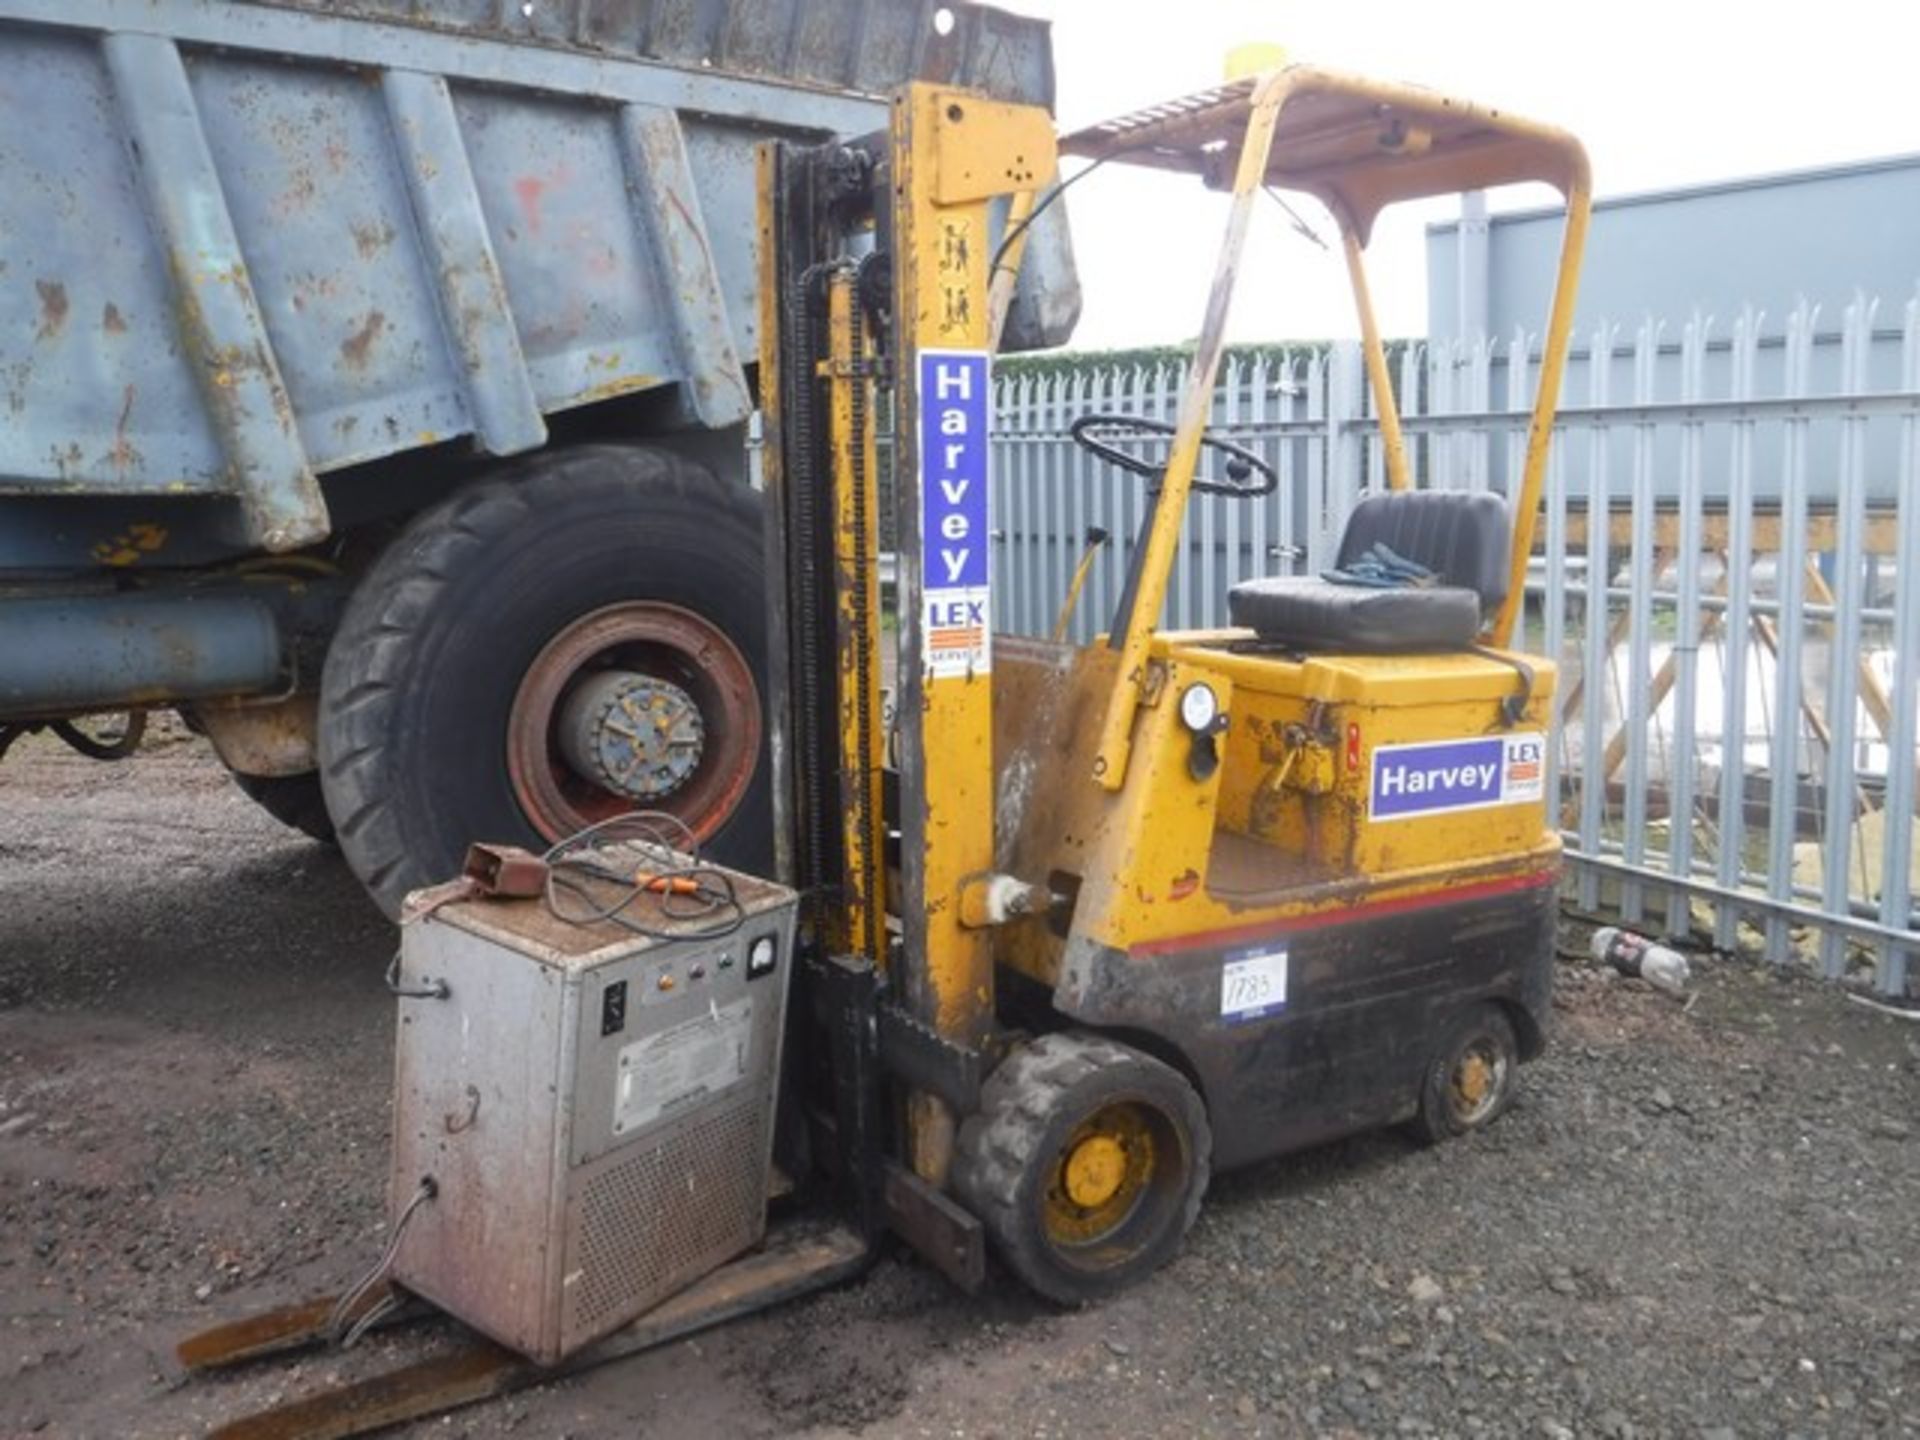 RANSOME ELECTRIC FORKLIFT C/W CHARGER MODEL NO. - L25B